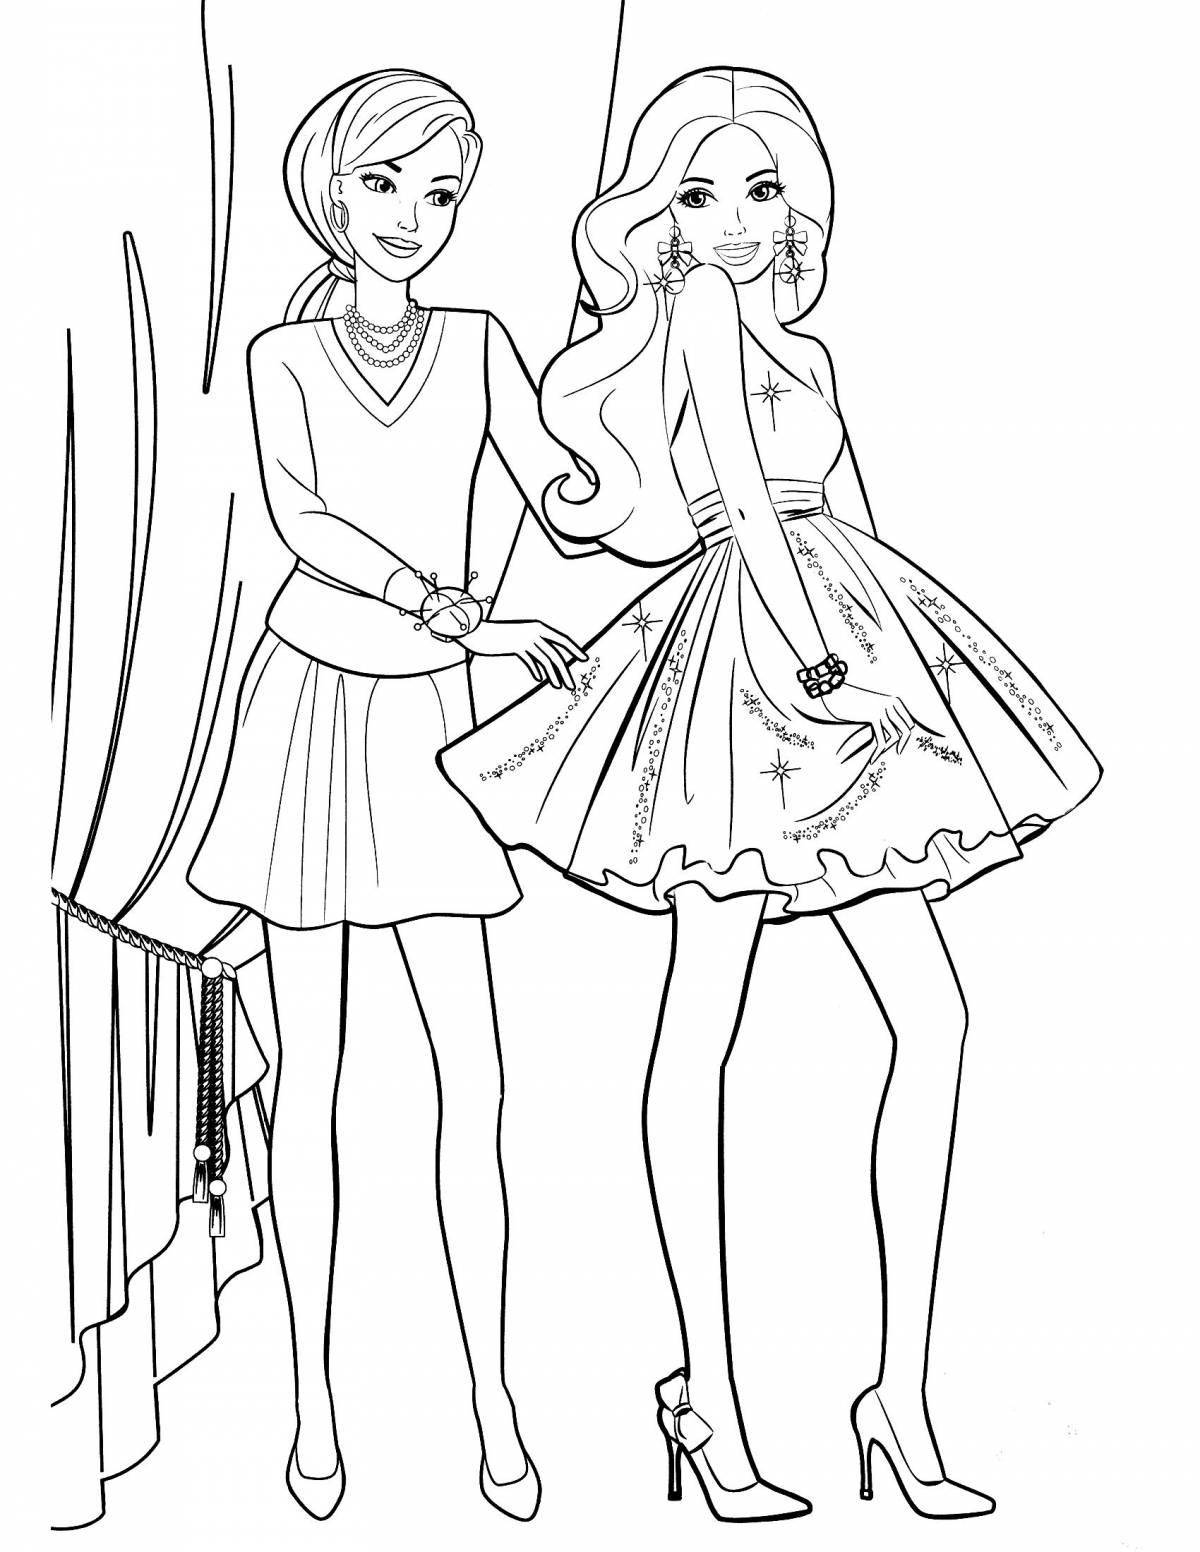 A fun coloring book for Barbie dolls for kids